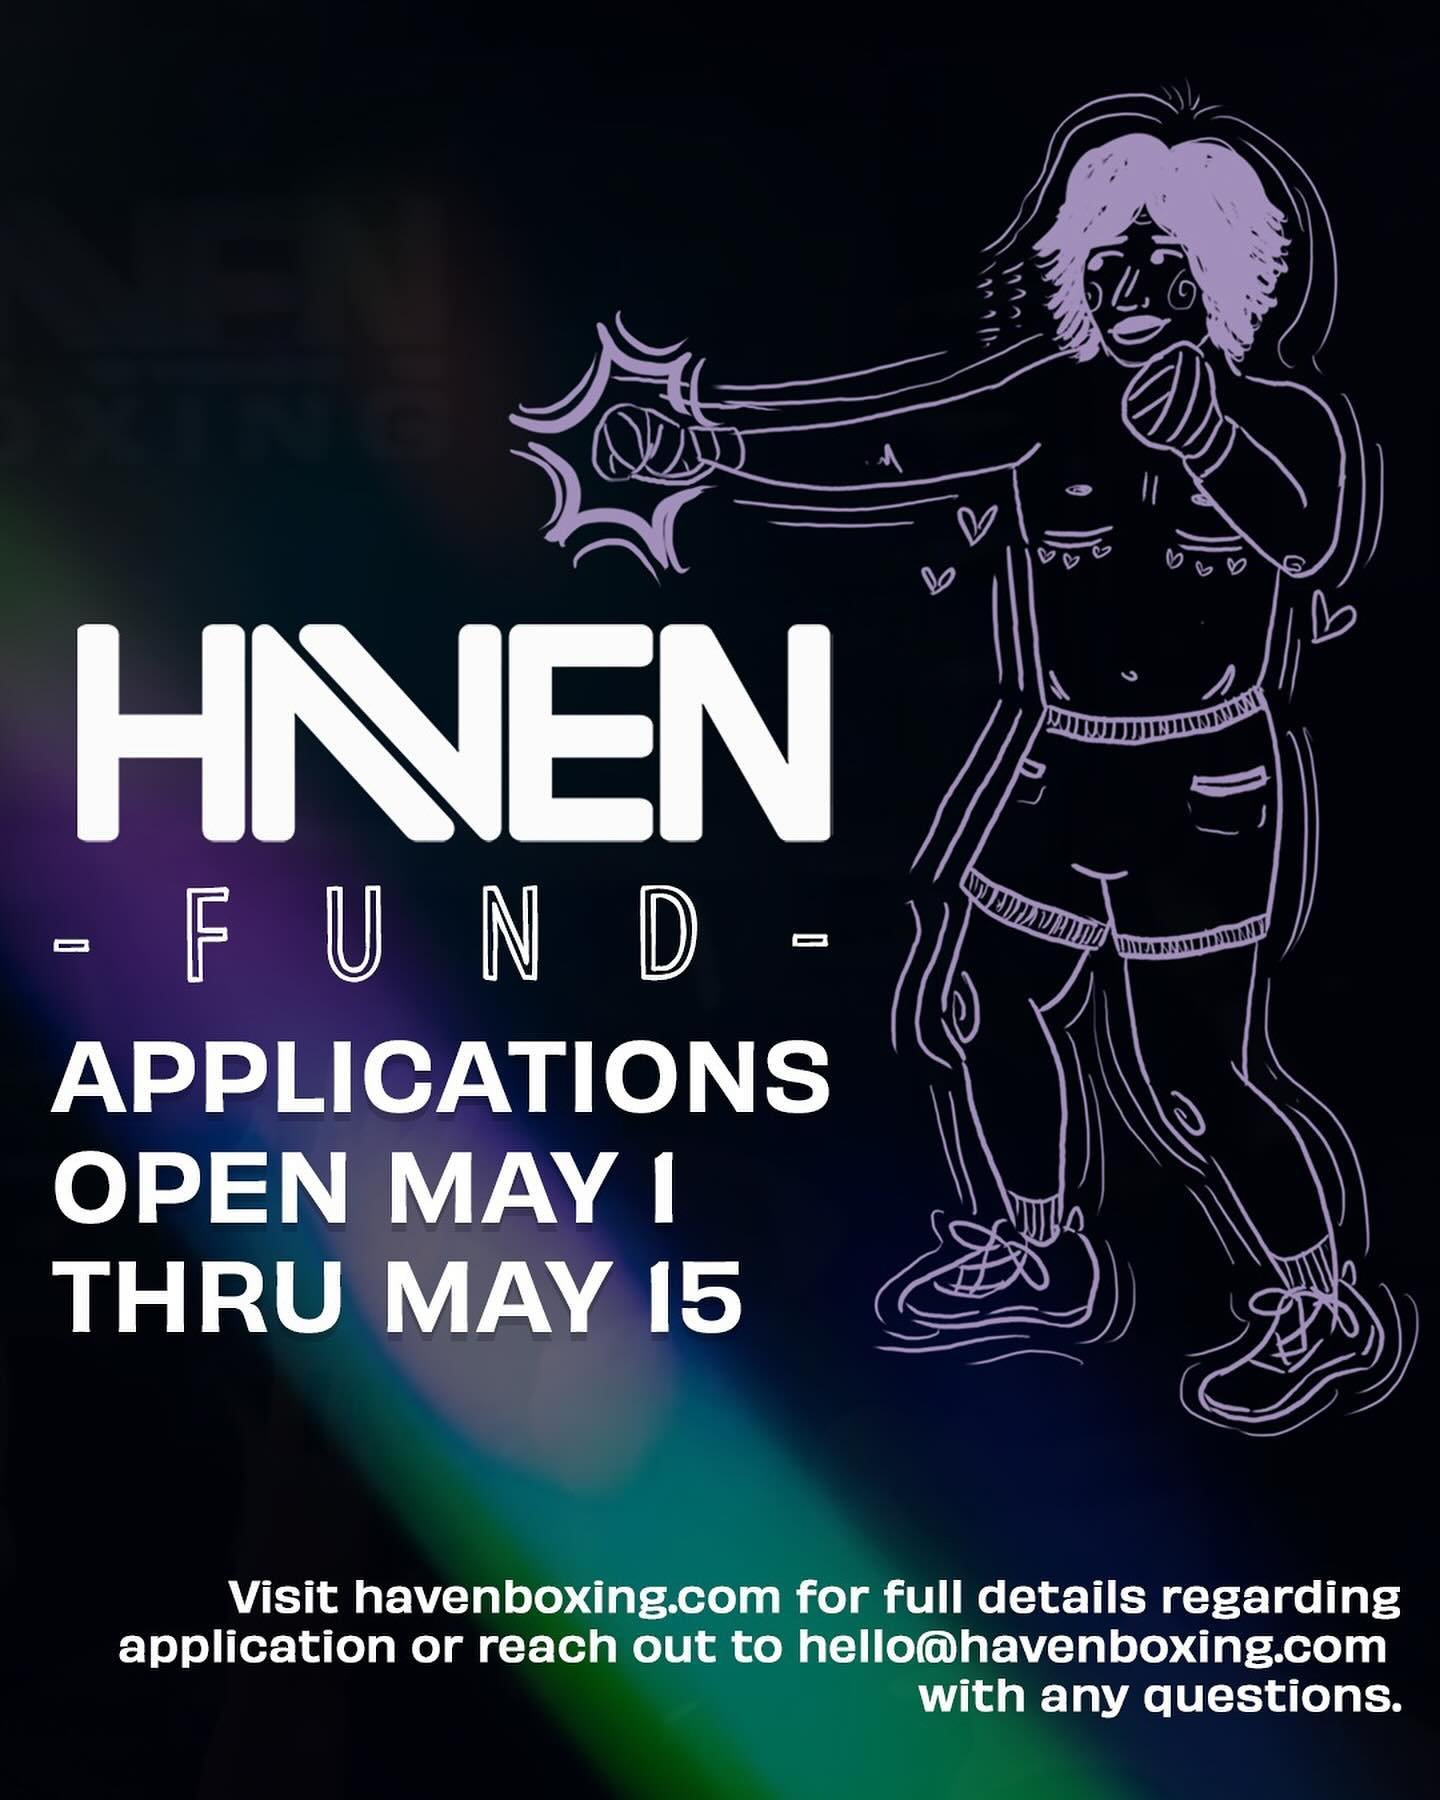 🎶ITS GONNA BE MAY 🎶

It&rsquo;s also our birthday month, baby is turning 1!!! 🥳 We have a ton of new birthday announcements coming down the pipeline for May/June, but let&rsquo;s start with come classics: 

🥊 HAVEN FUND APPLICATIONS OPEN MAY 1 - 